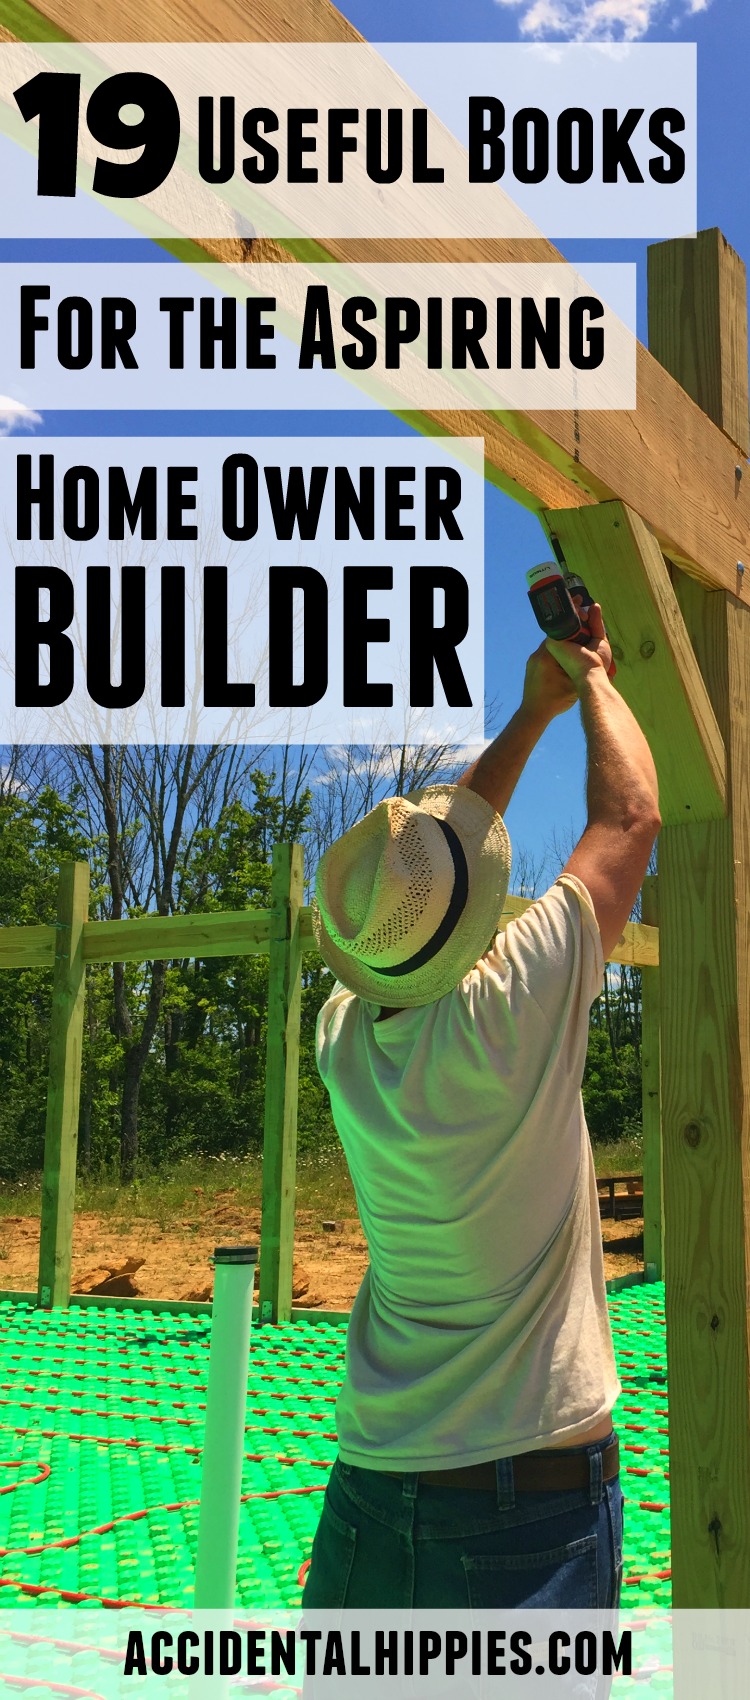 Books for the home owner builder. Find resources to learn about building code, residential design, permitting, building inspections, construction techniques, and other aspects of building a home from scratch.